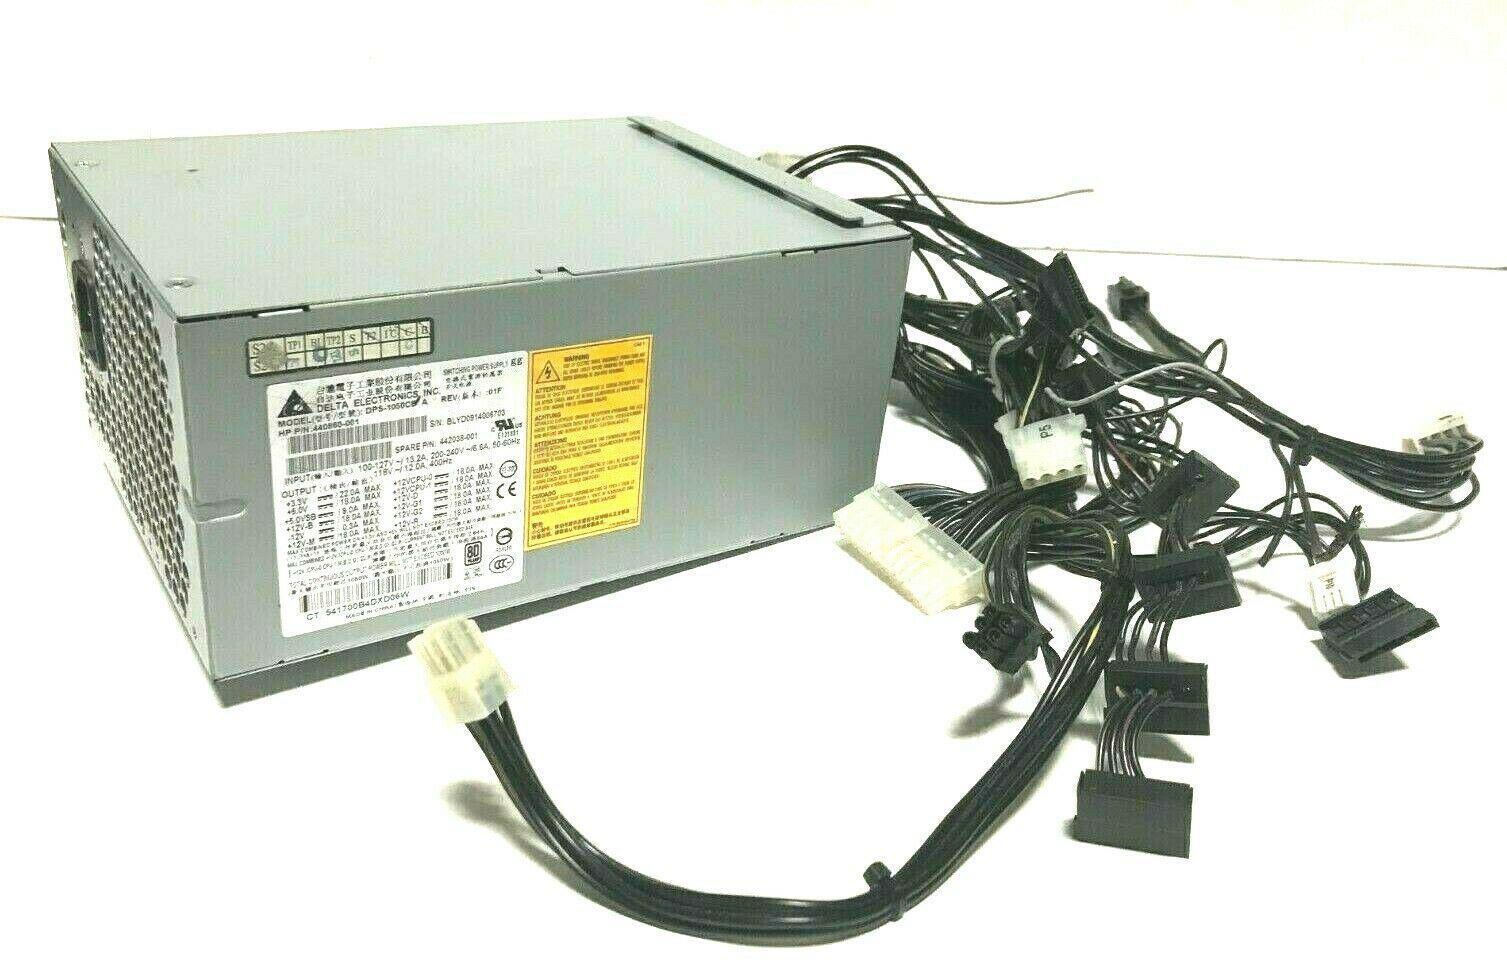 DPS 1050CB 440860 001 442038 001 power supply 1 050 watt wide ranging active power factor corrected with 80 efficient rating energy star 4 0 has a second pci express auxiliary connector